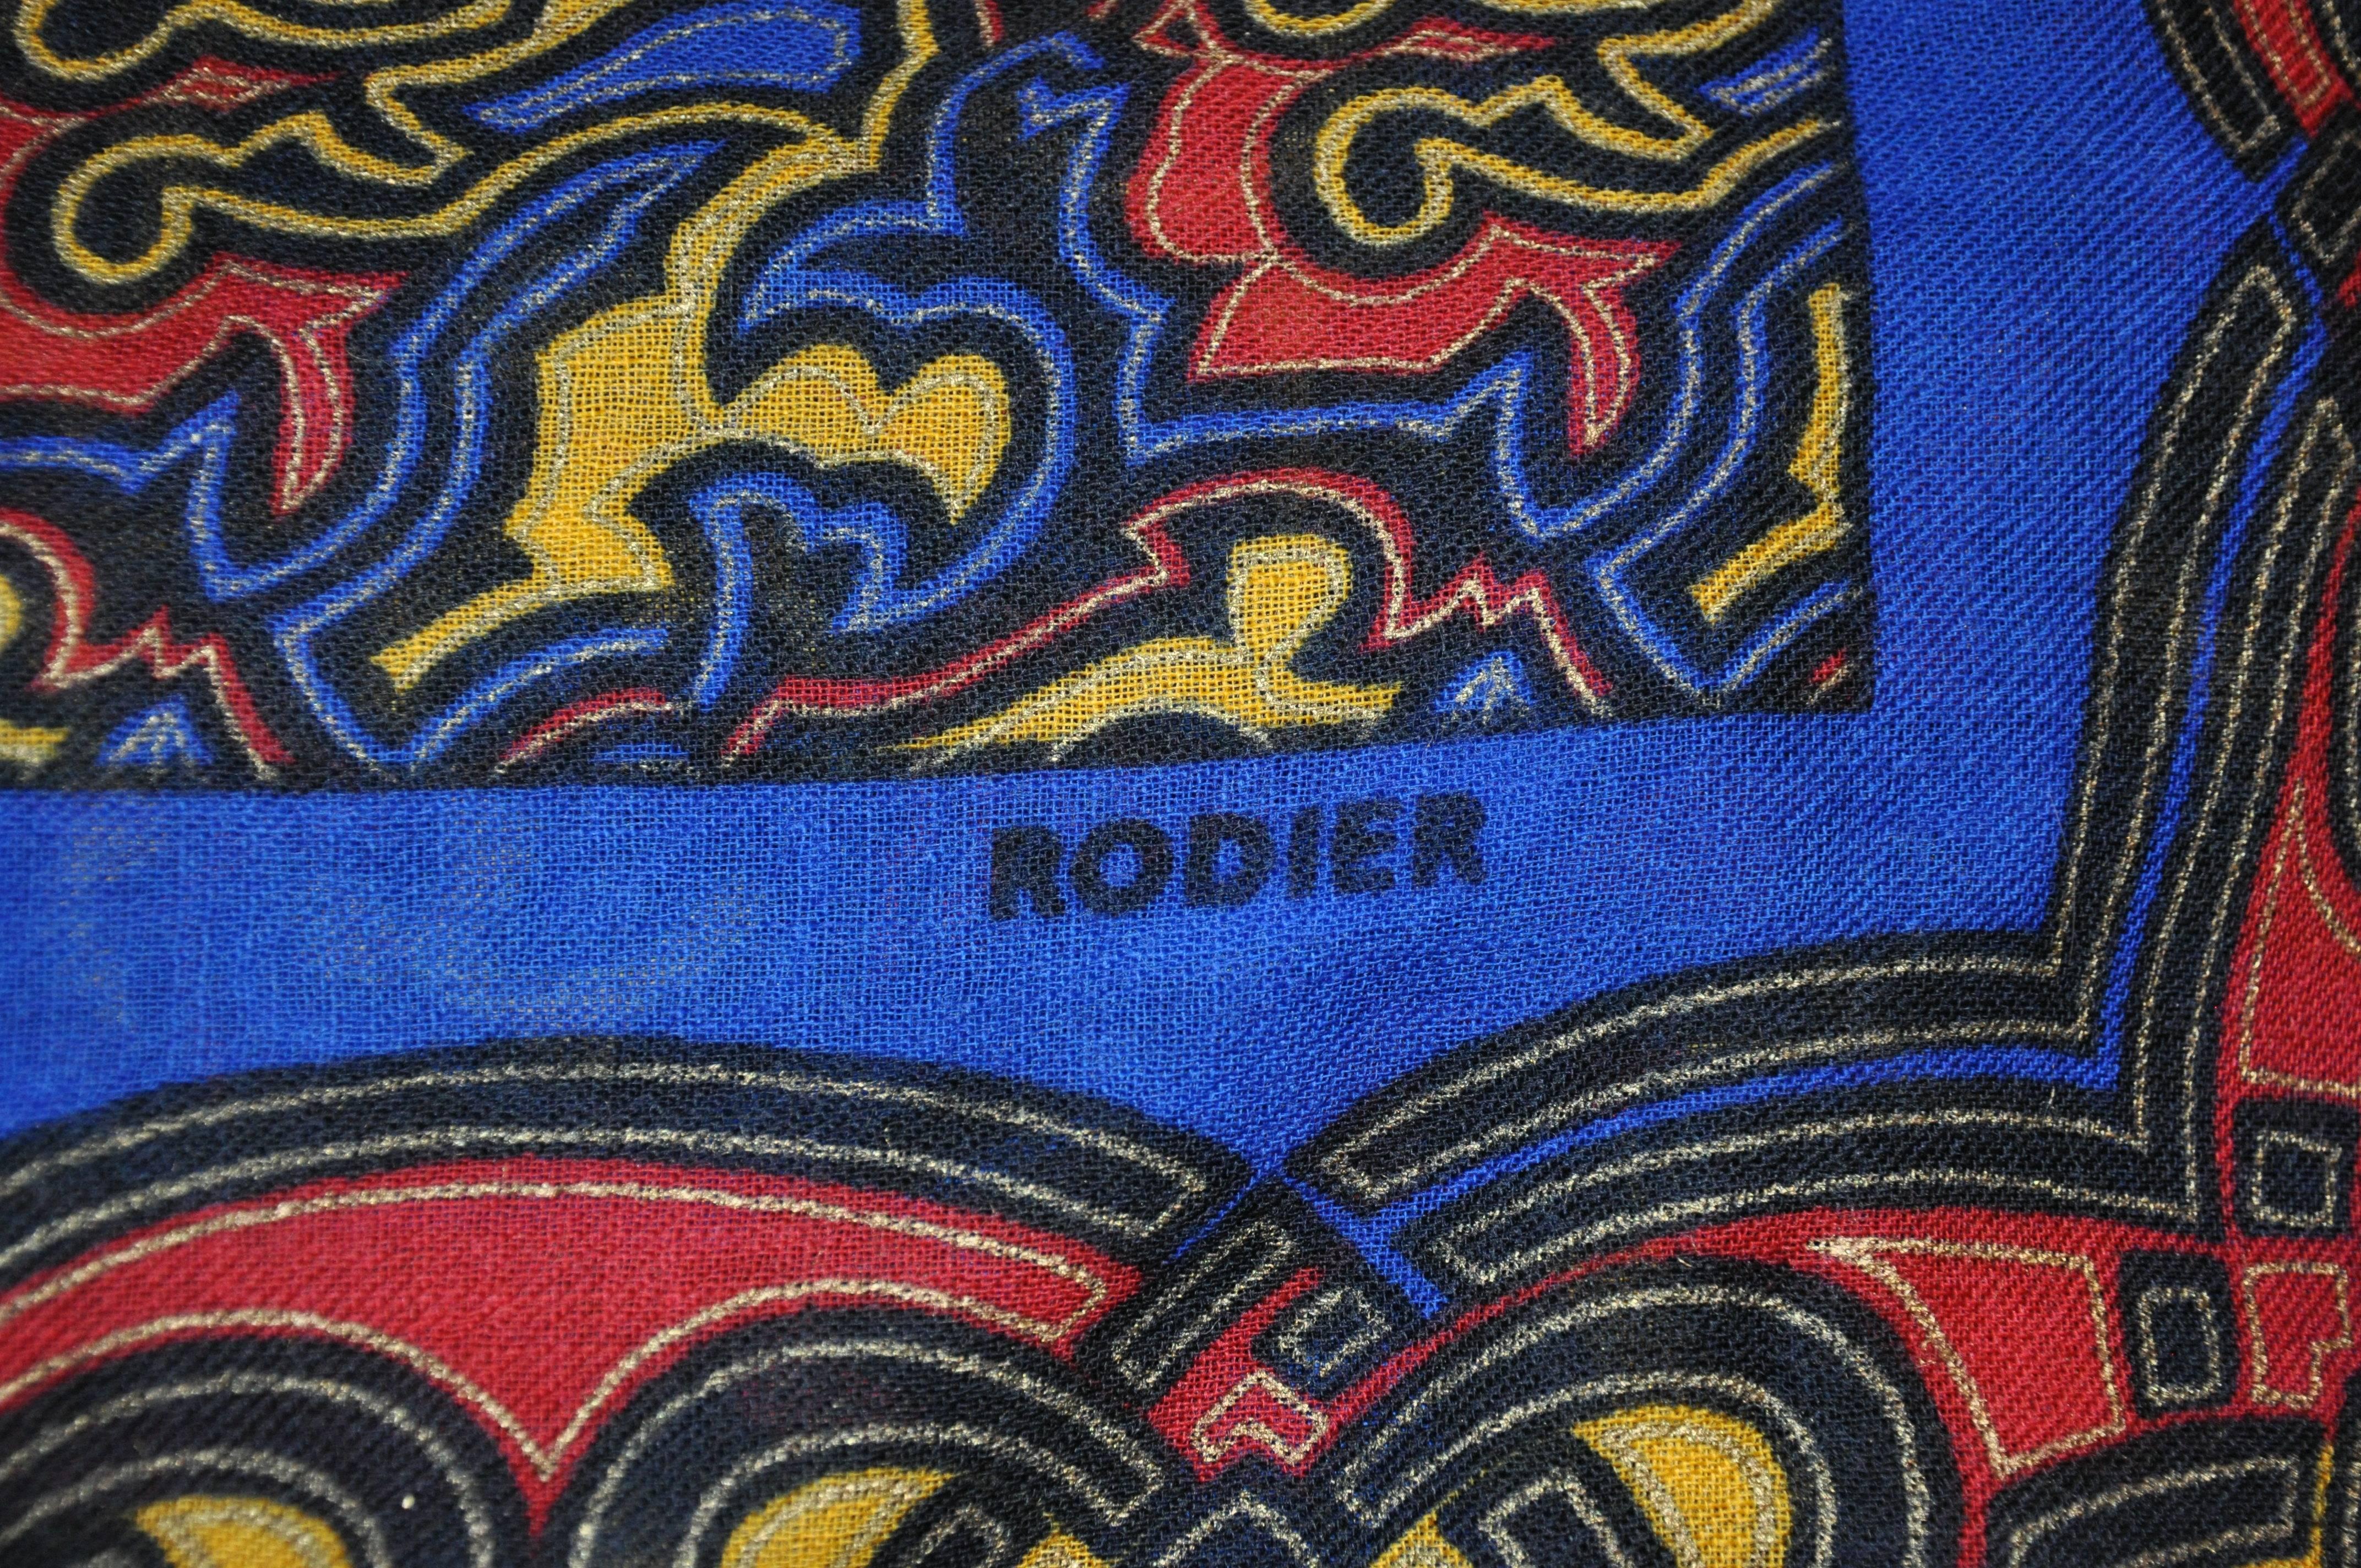         Rodier's wonderfully richly detailed huge bold abstract wool challis shawl is accented with fringed edges as well as their signature name logo. This wonderfully huge shawl which measures 53